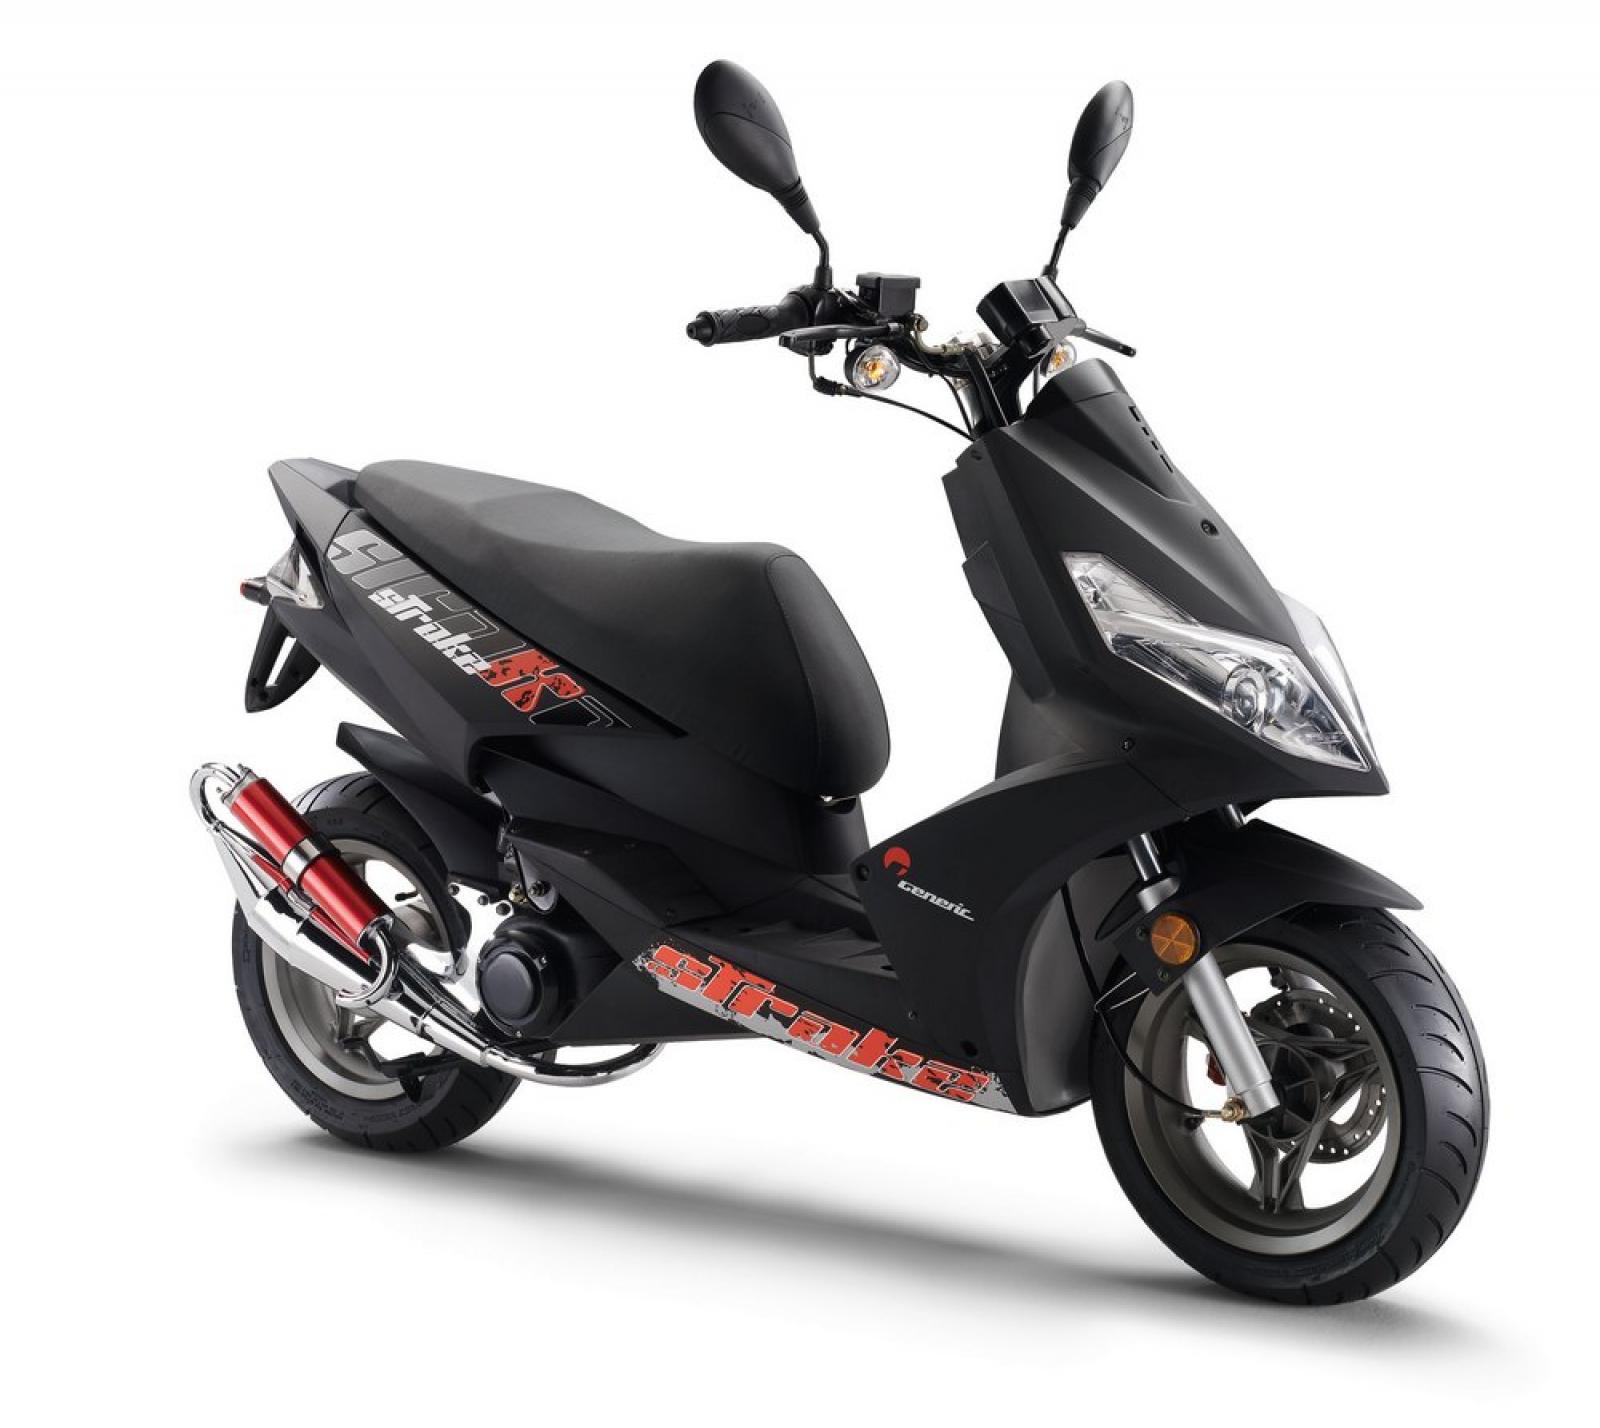 Alquiler scooter 50cc por meses Barcelona - Best Rent a Scooter.